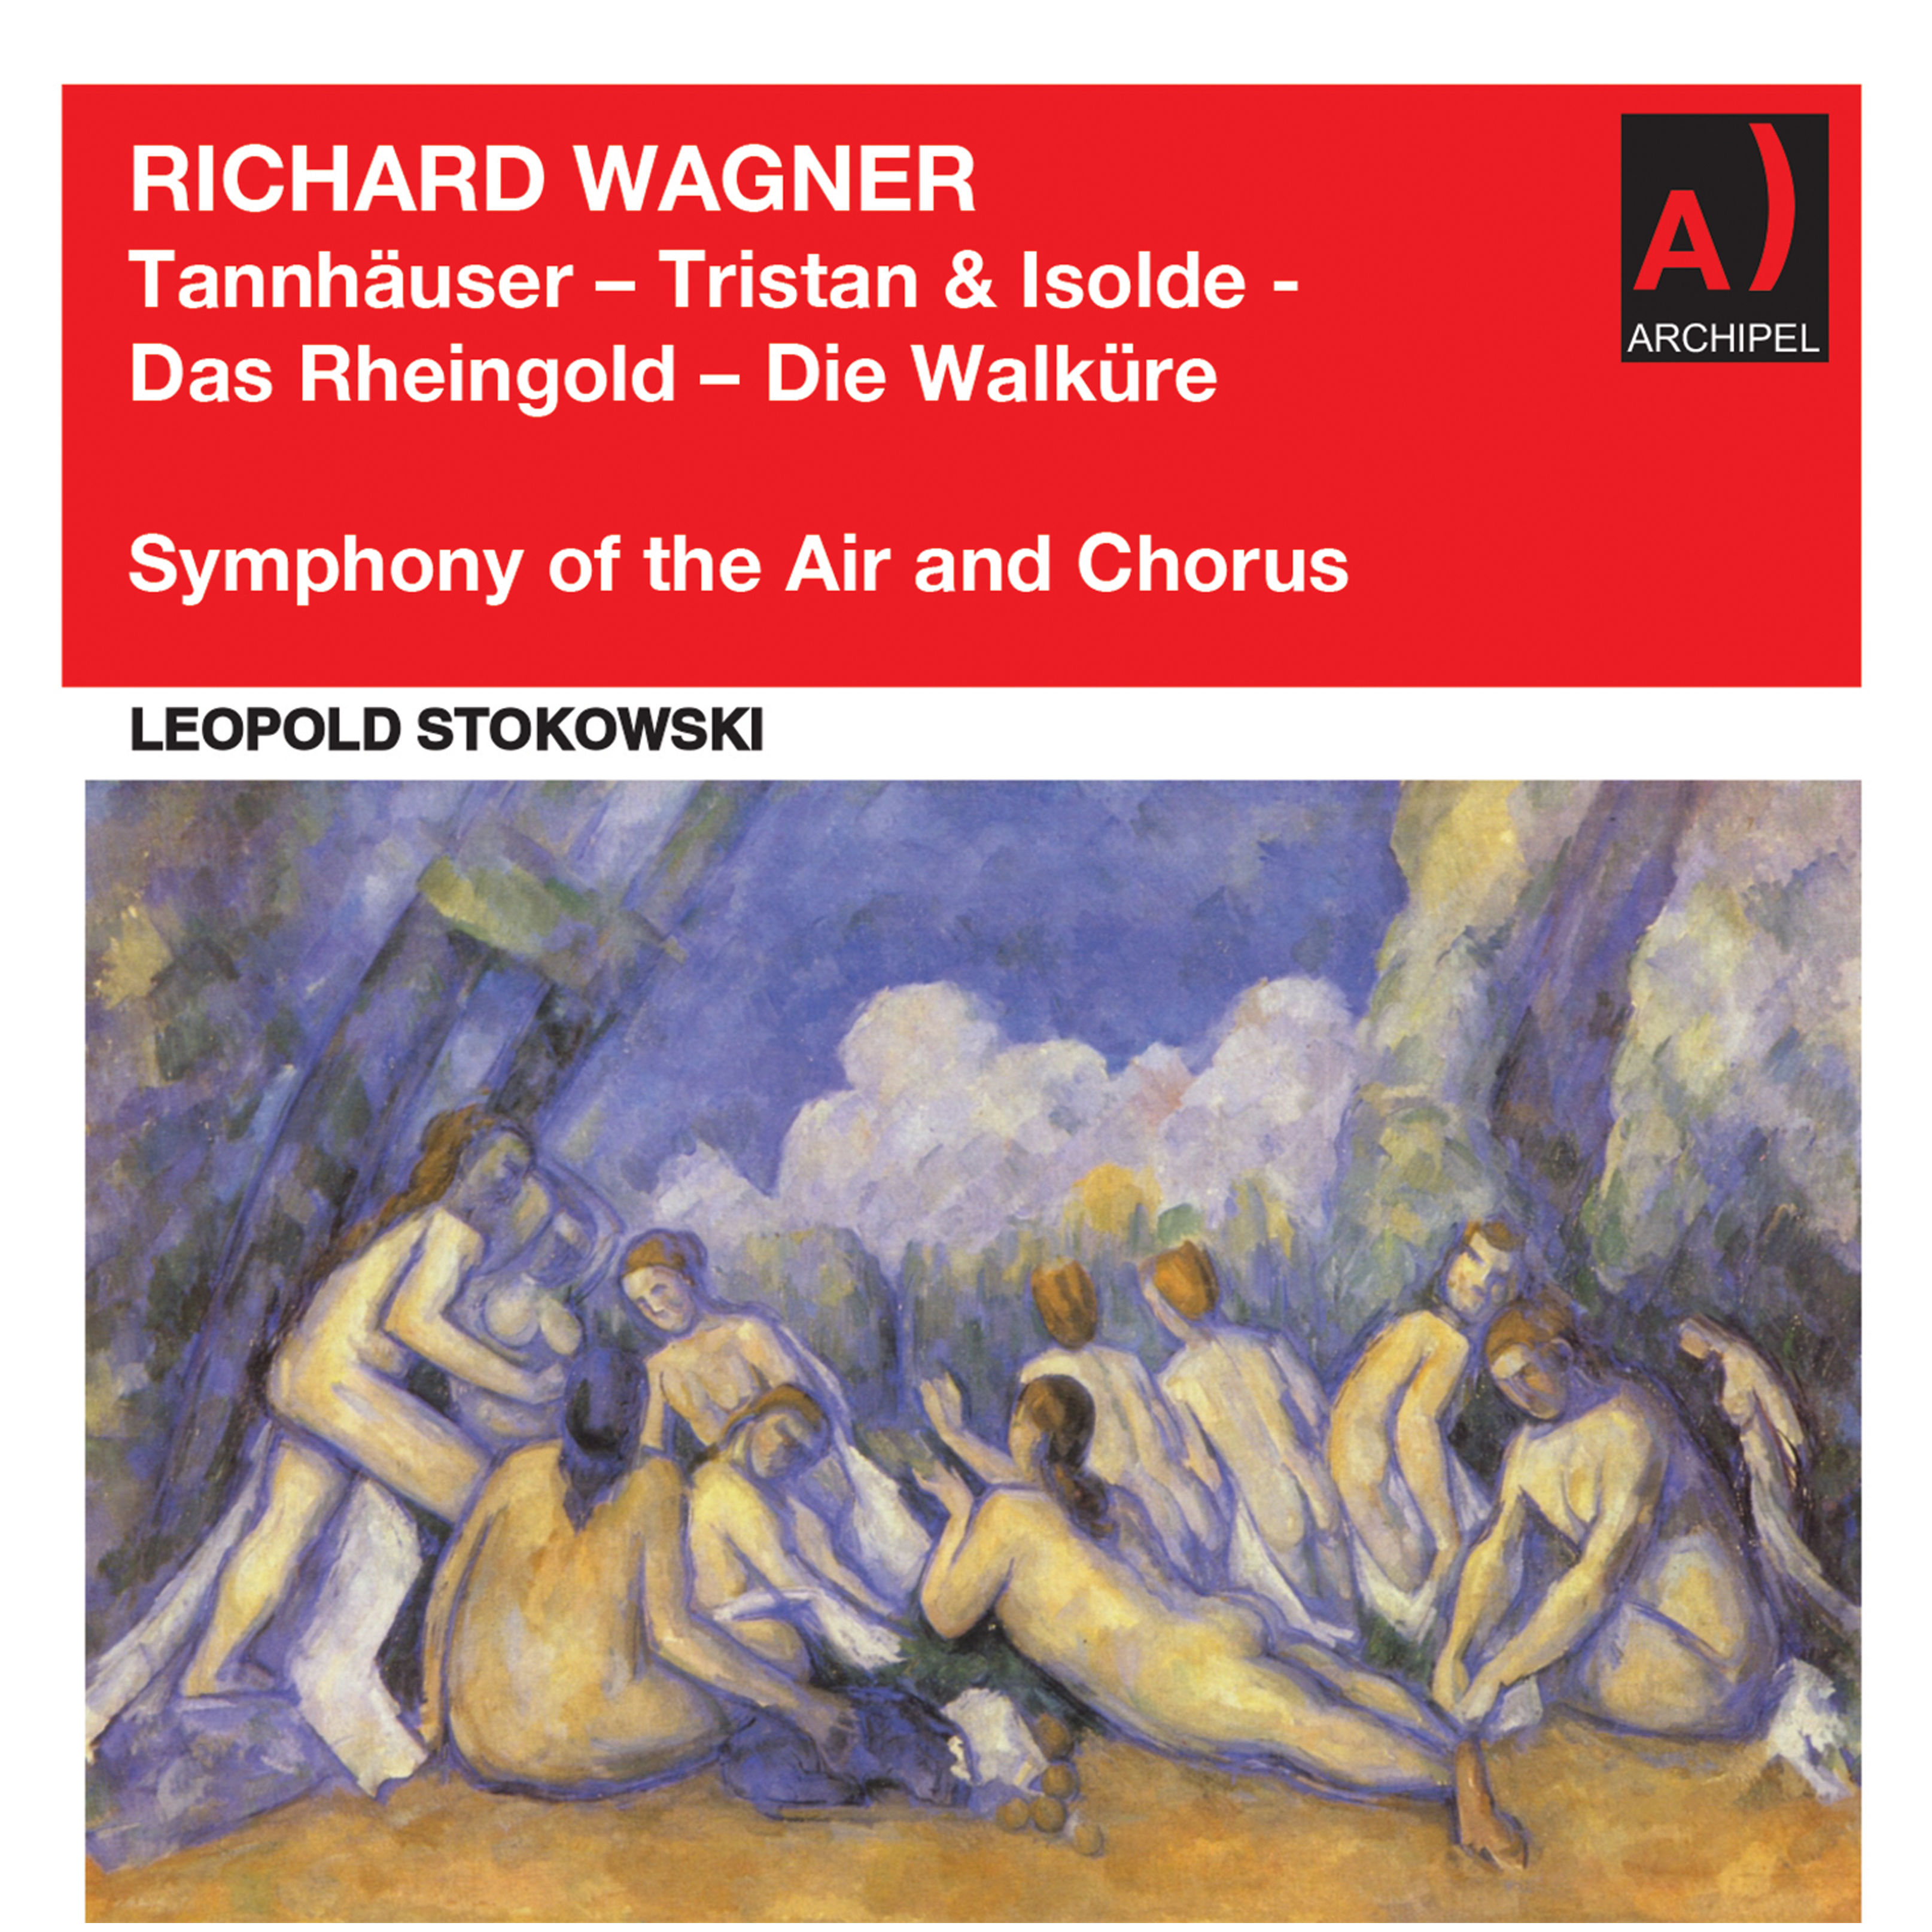 Symphony of the Air - Wagner: Orchestral Works (Remastered 2022) (1961/2022) [FLAC 24bit/96kHz] Download